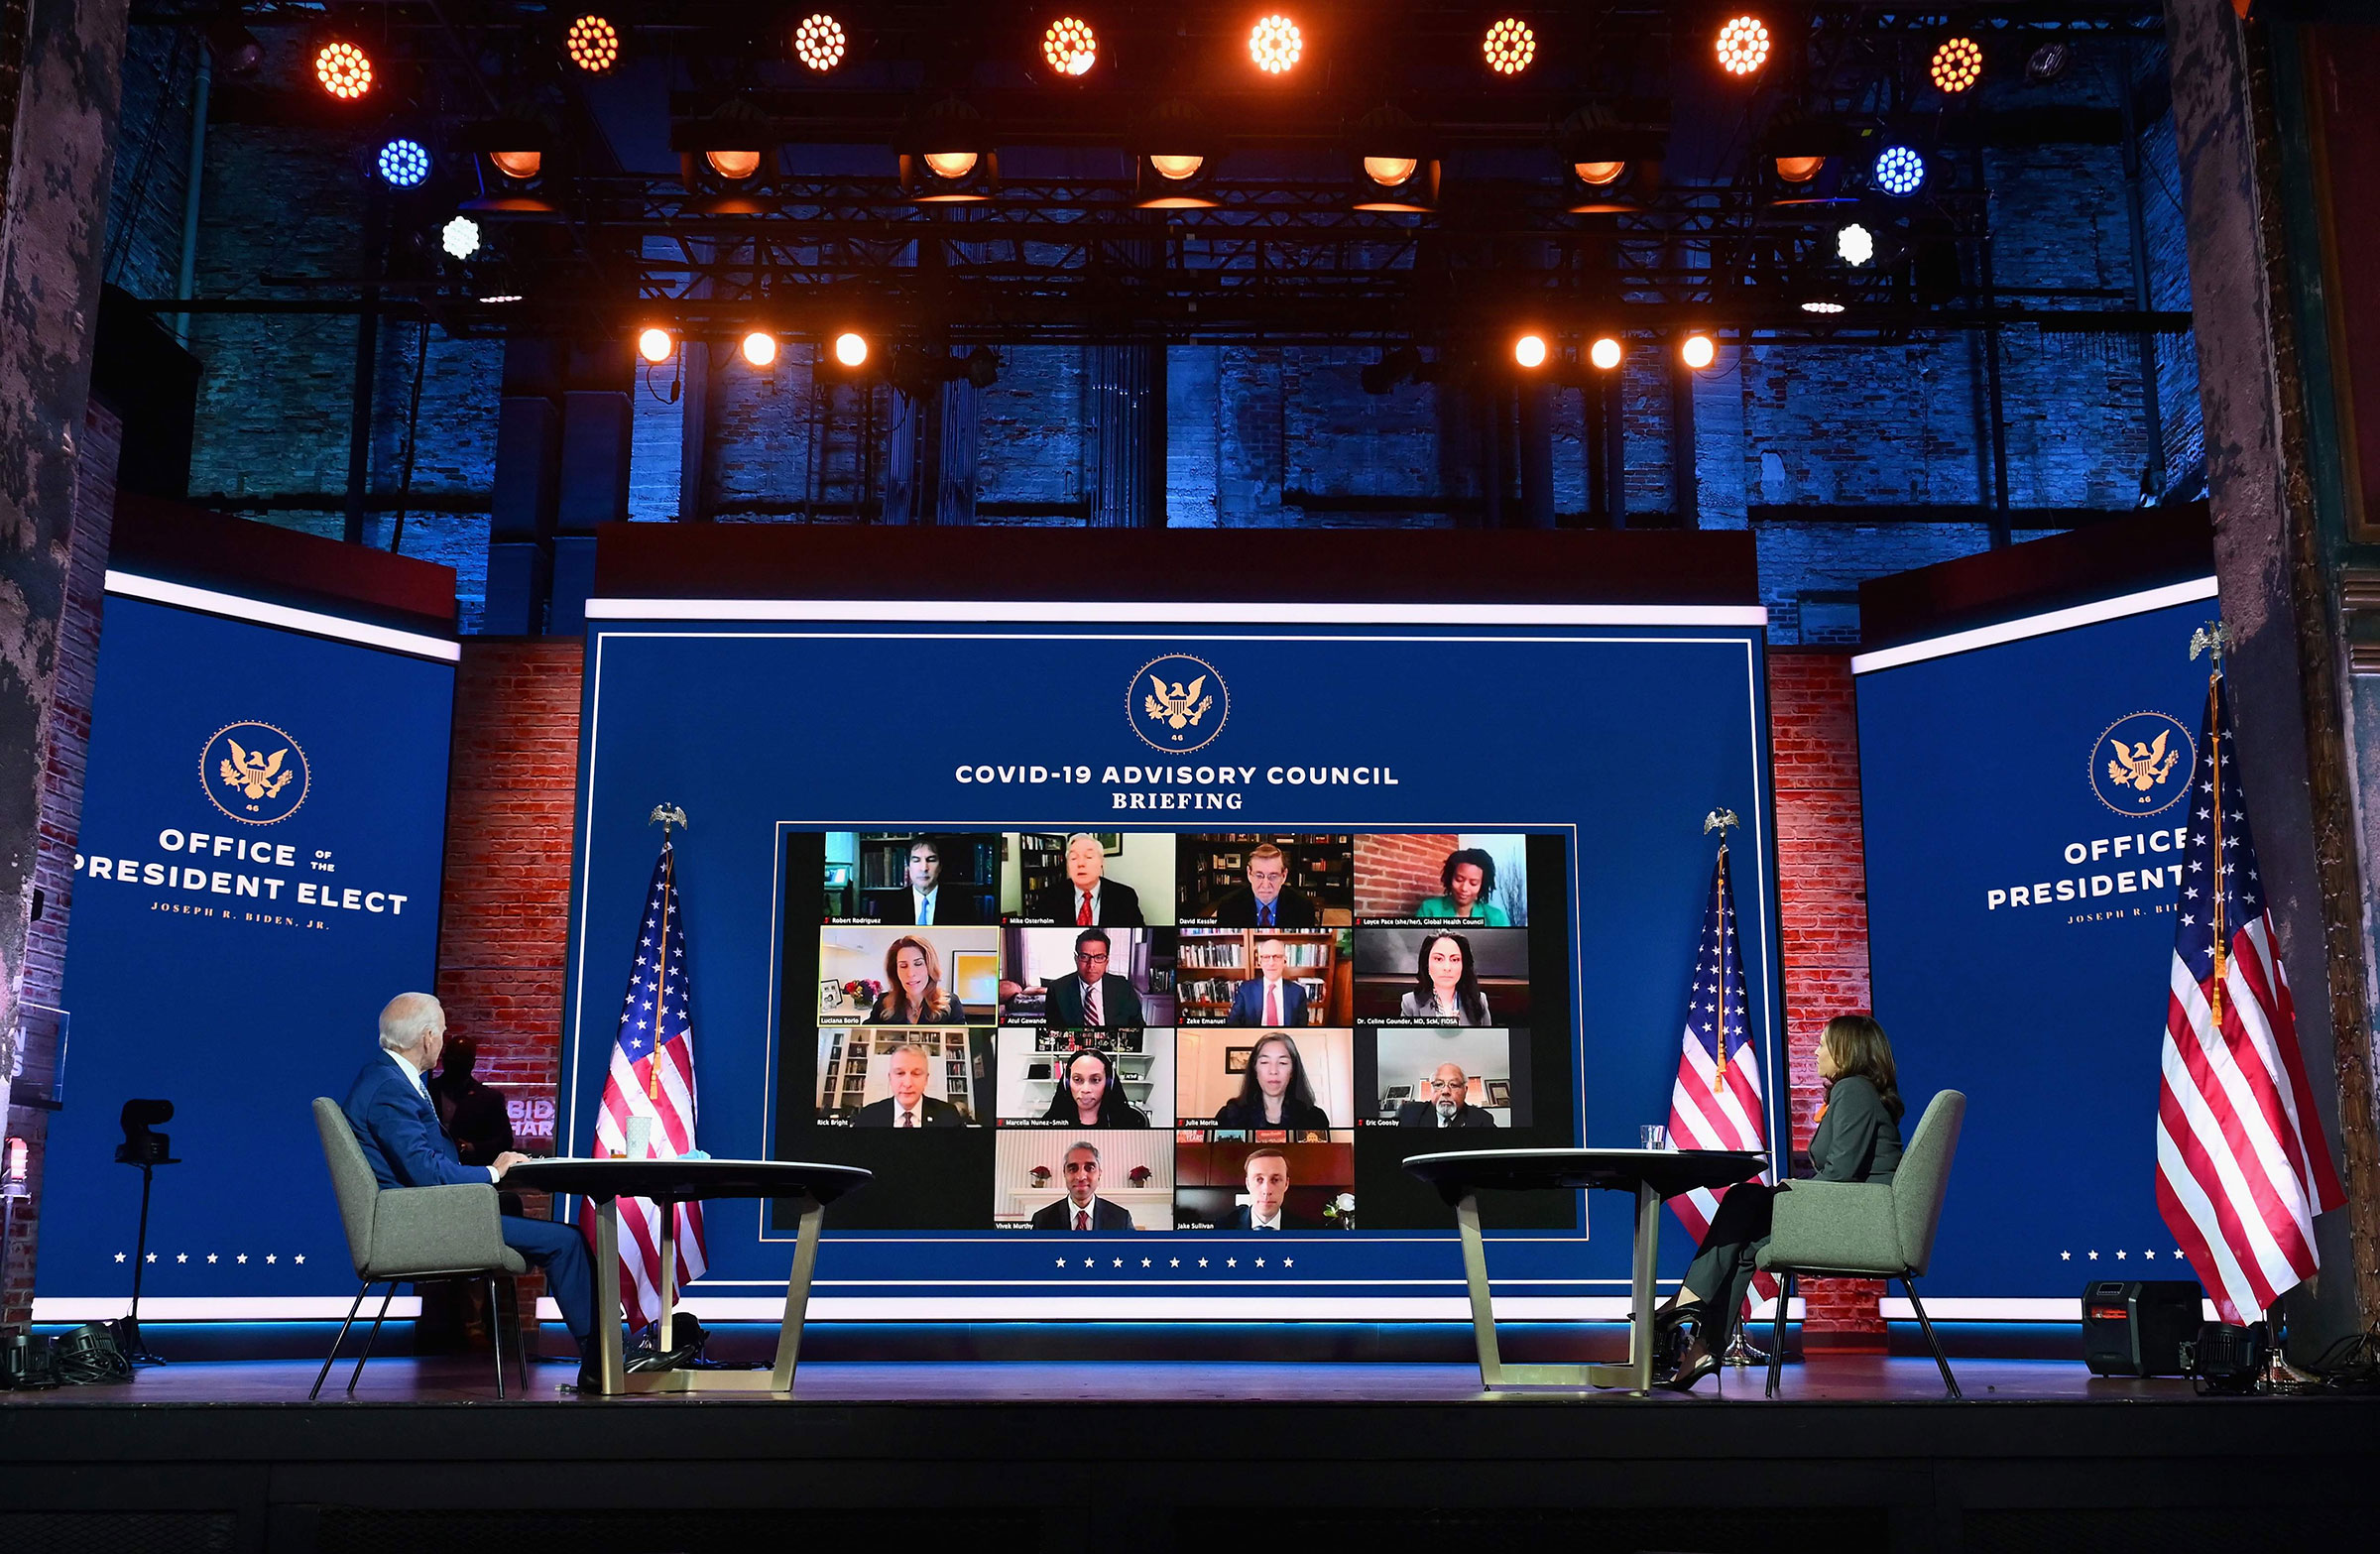 President-elect Joe Biden and Vice President-elect Kamala Harris speak virtually with the Covid-19 Advisory Council during a briefing at The Queen theatre on Nov. 9, 2020 in Wilmington, Del. (Angela Weiss—AFP/Getty Images)